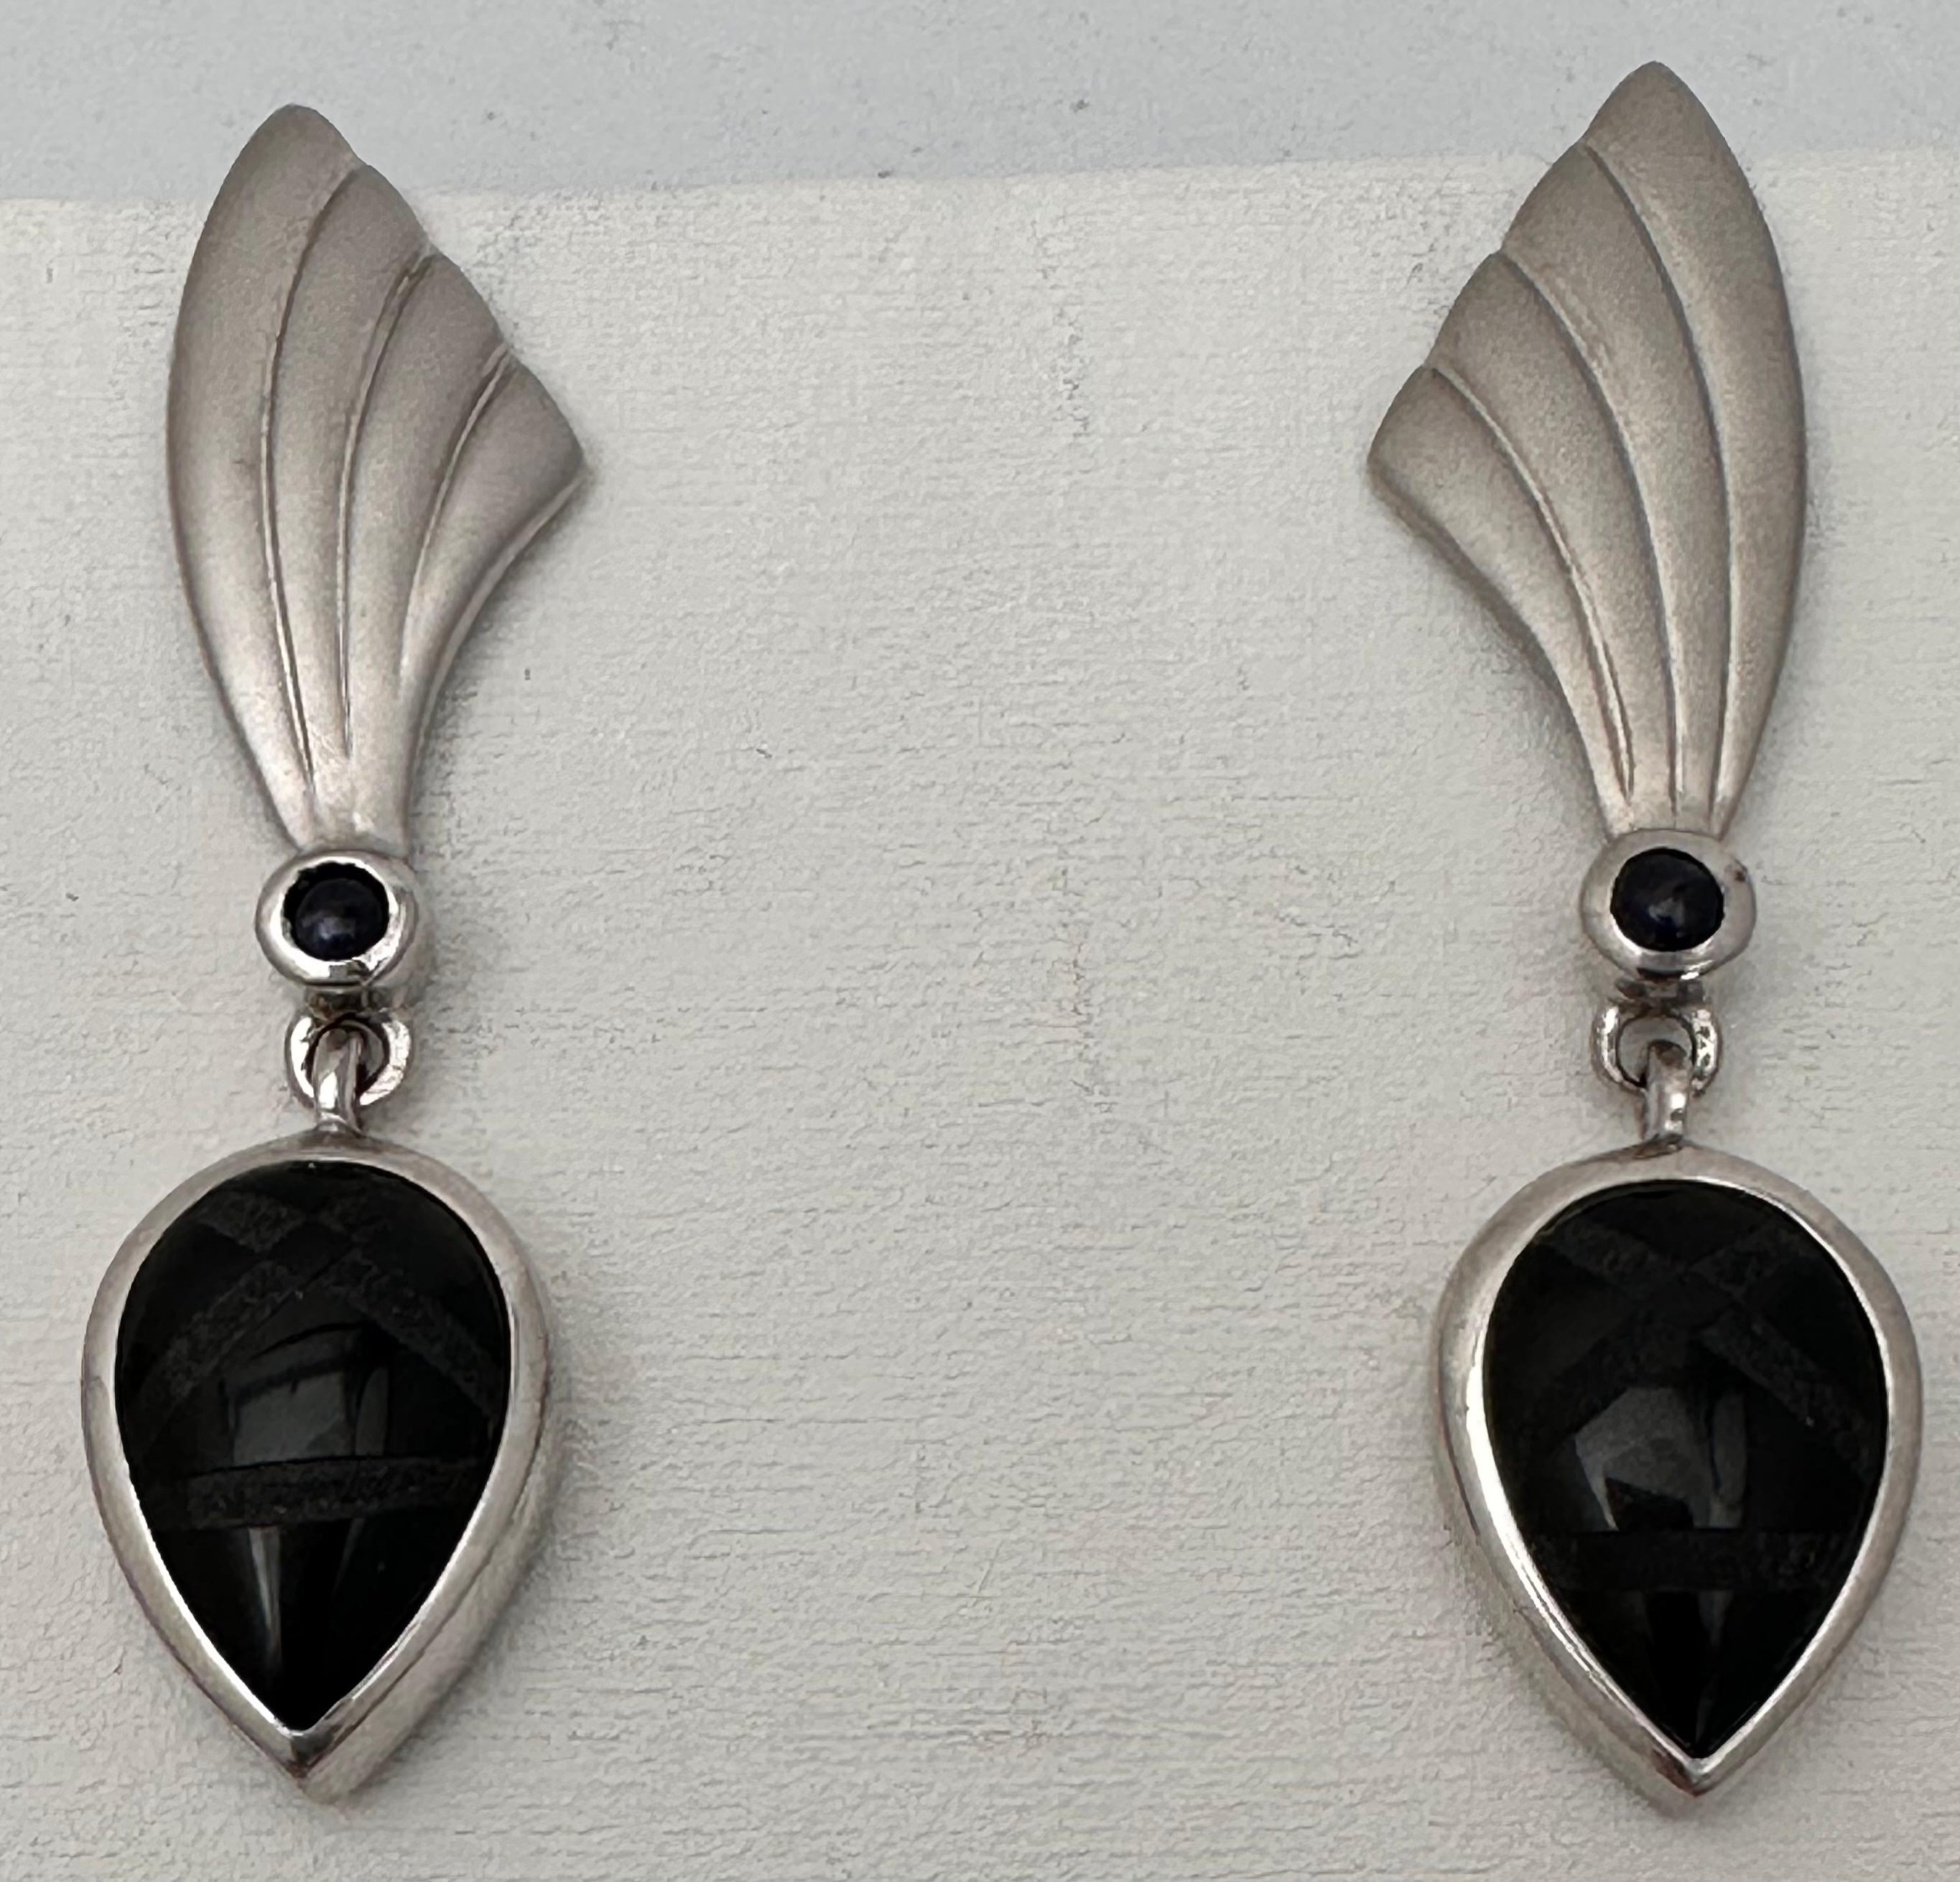 Designer Handmade Sterling Silver .925 3mm Sapphire Cabochons with Etched Pear Shaped Onyx Earrings
approx. 1/2